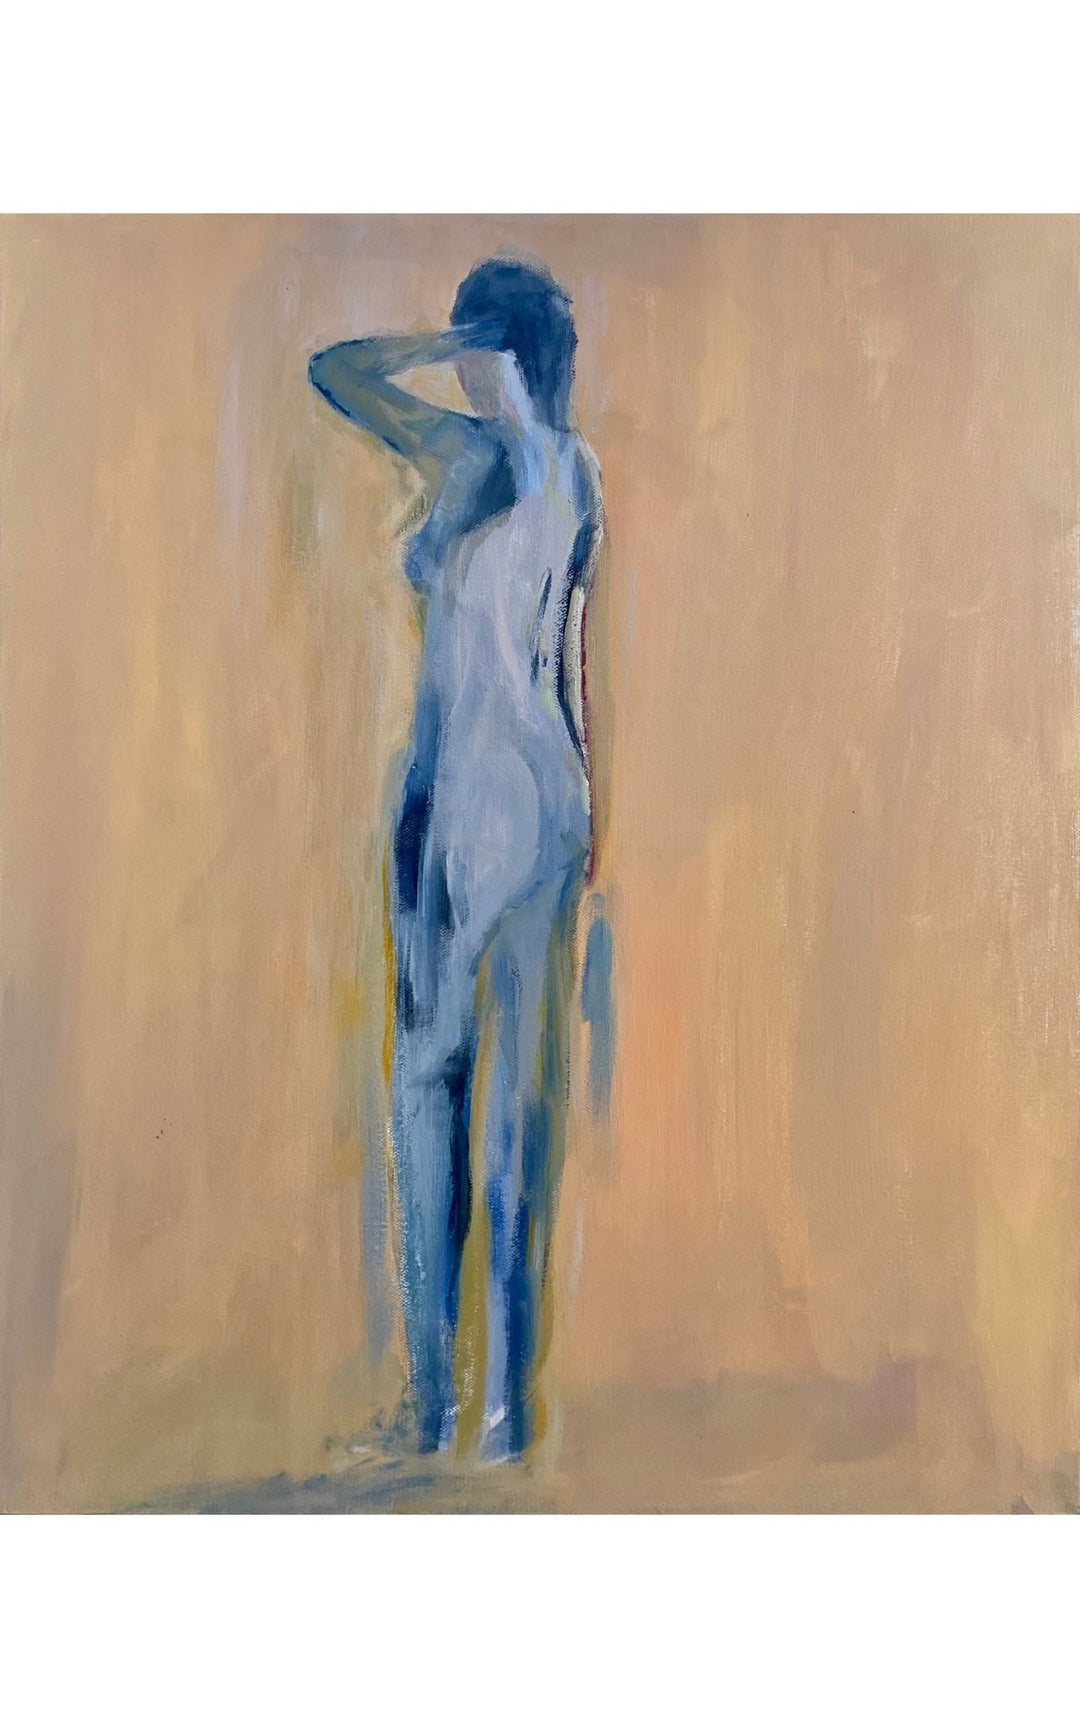 Acrylic painting on canvas of standing female figure with hand on head. Female is blue against a warm backgound. Languid - Artly International